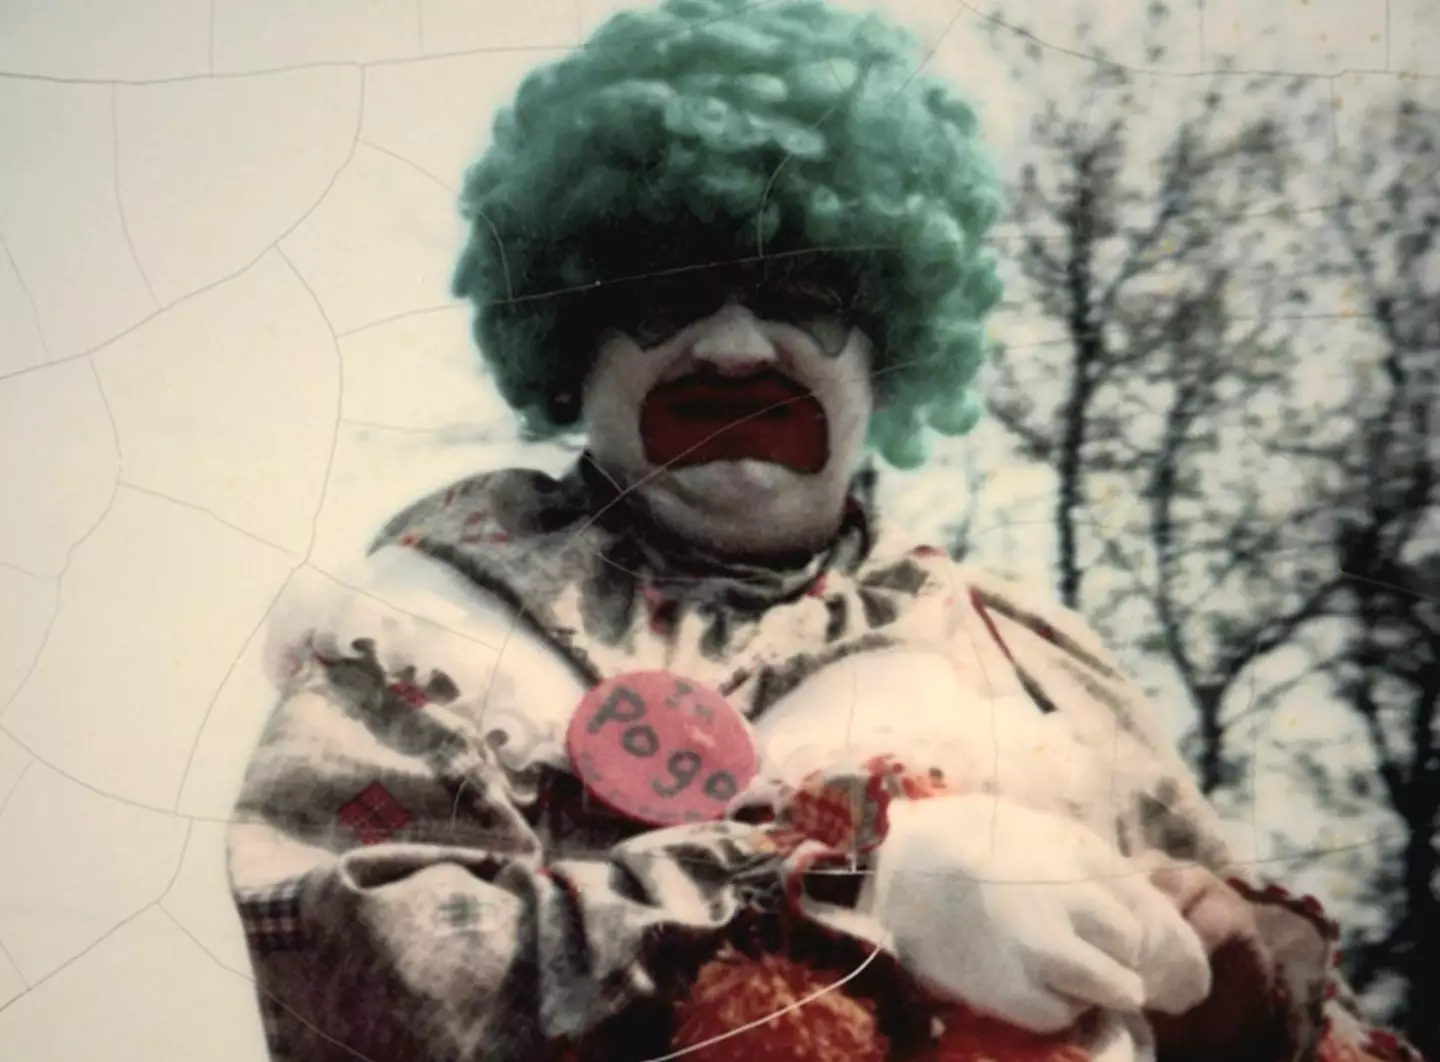 Gacy dressed up as a clown for parties.